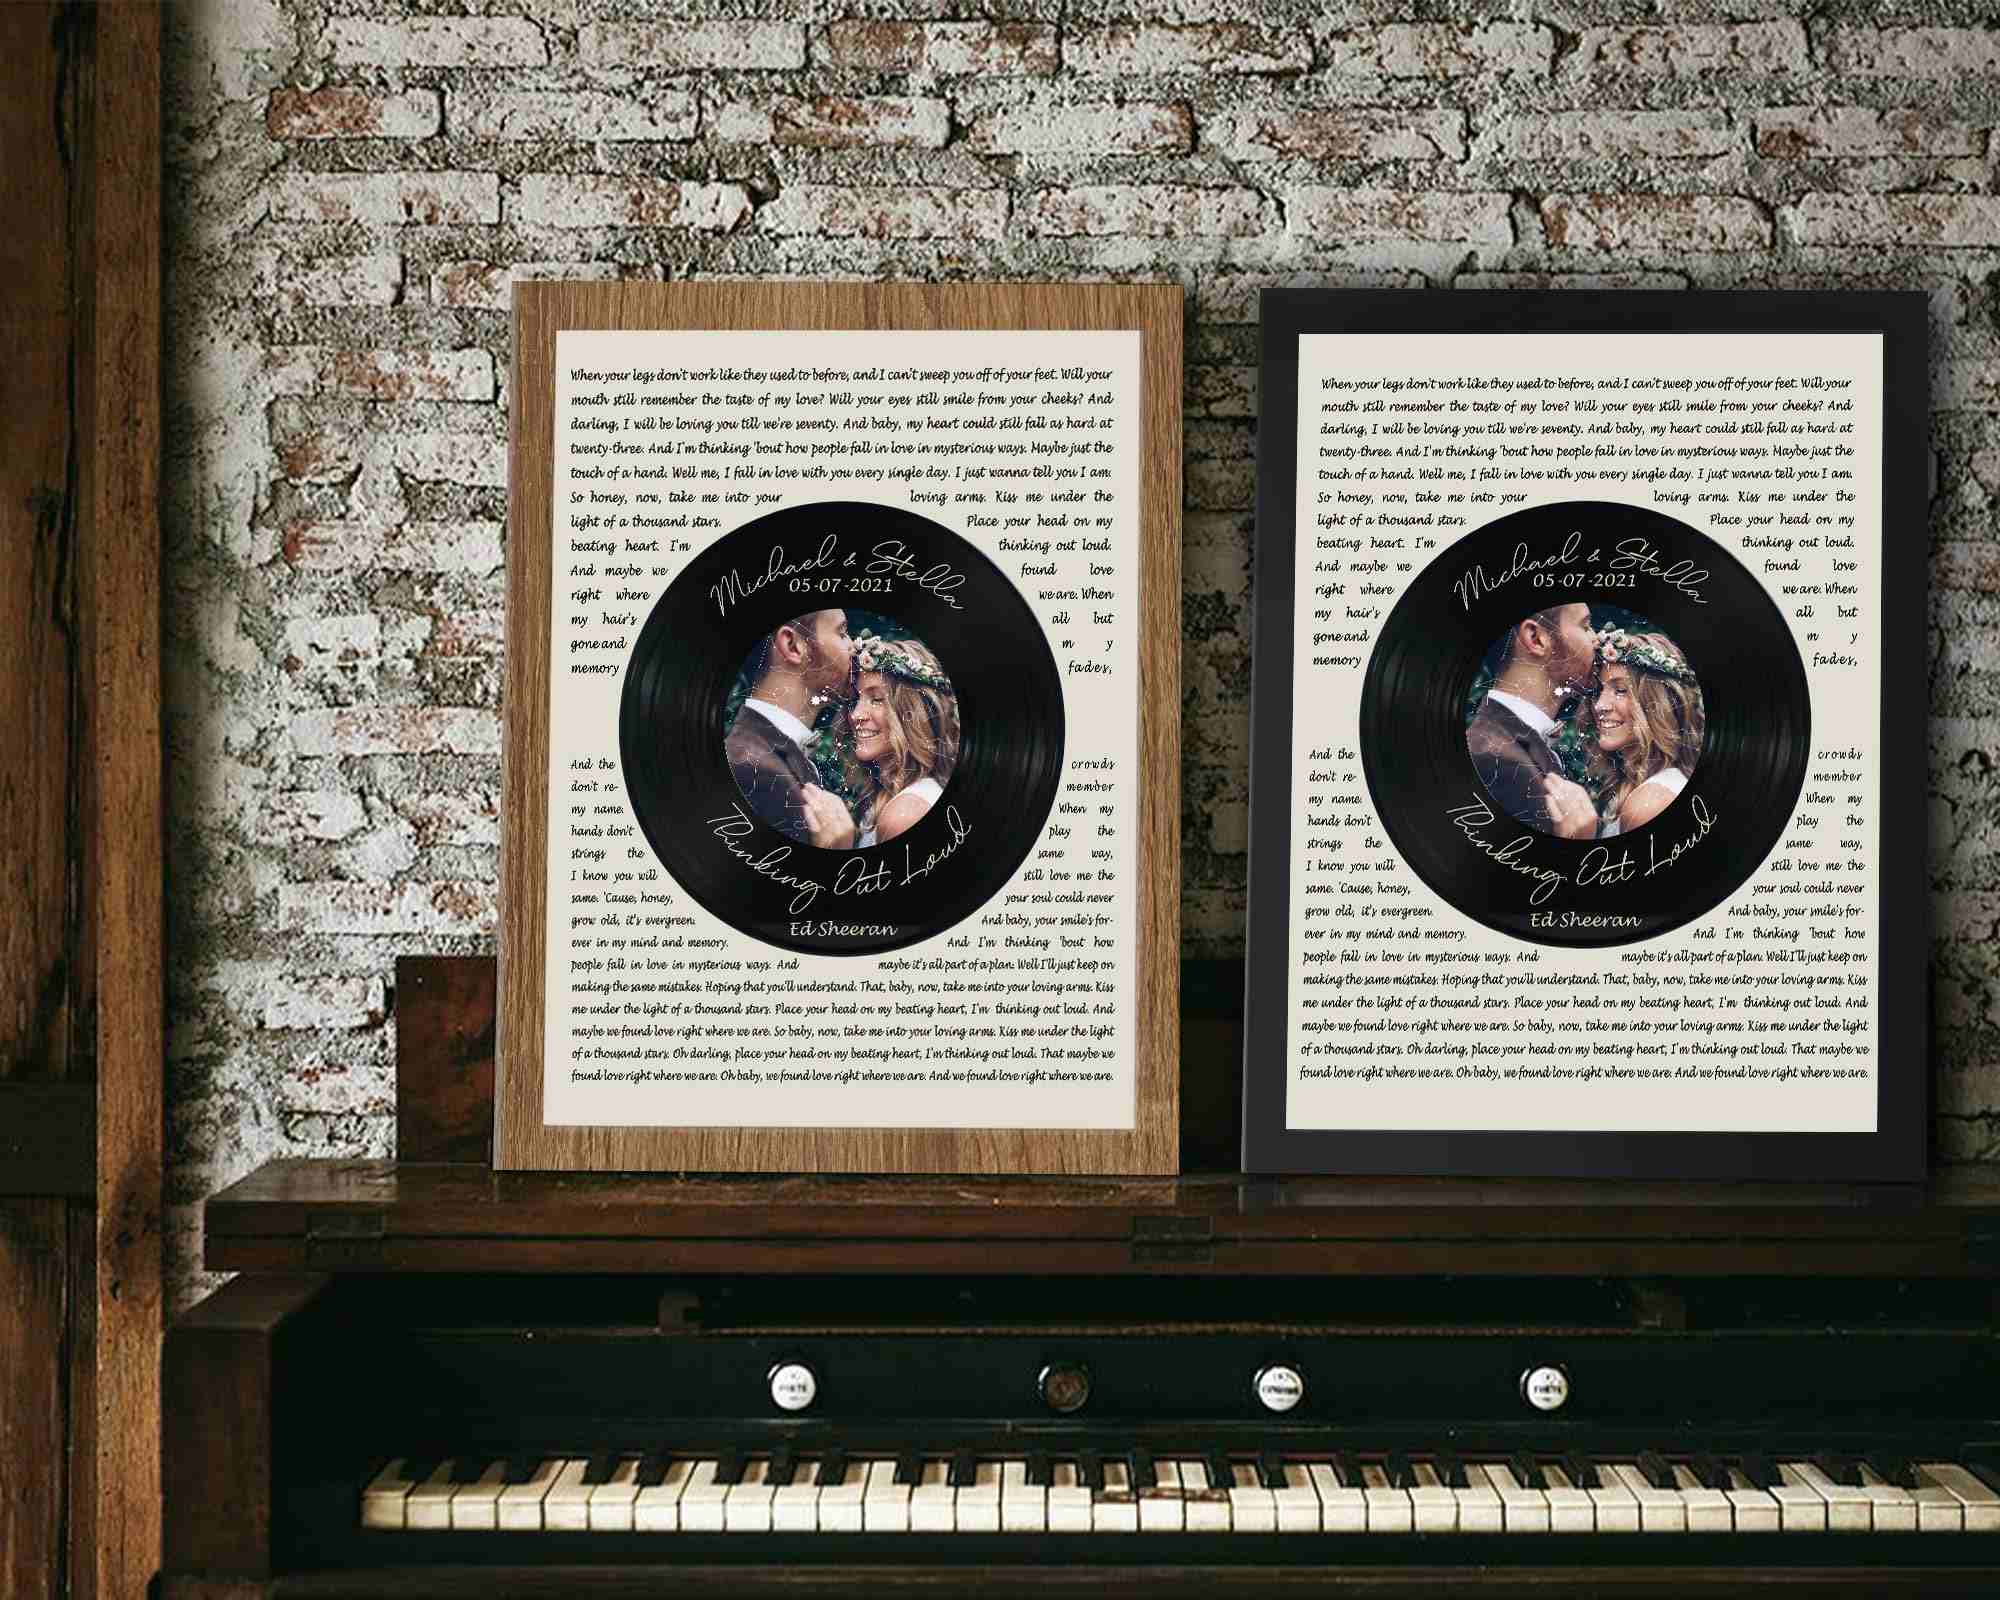 5 Year Anniversary Gifts for Her, Vinyl Record Wall 5 Year Wedding Anniversary Gift, 5th Year Wedding Anniversary Gift